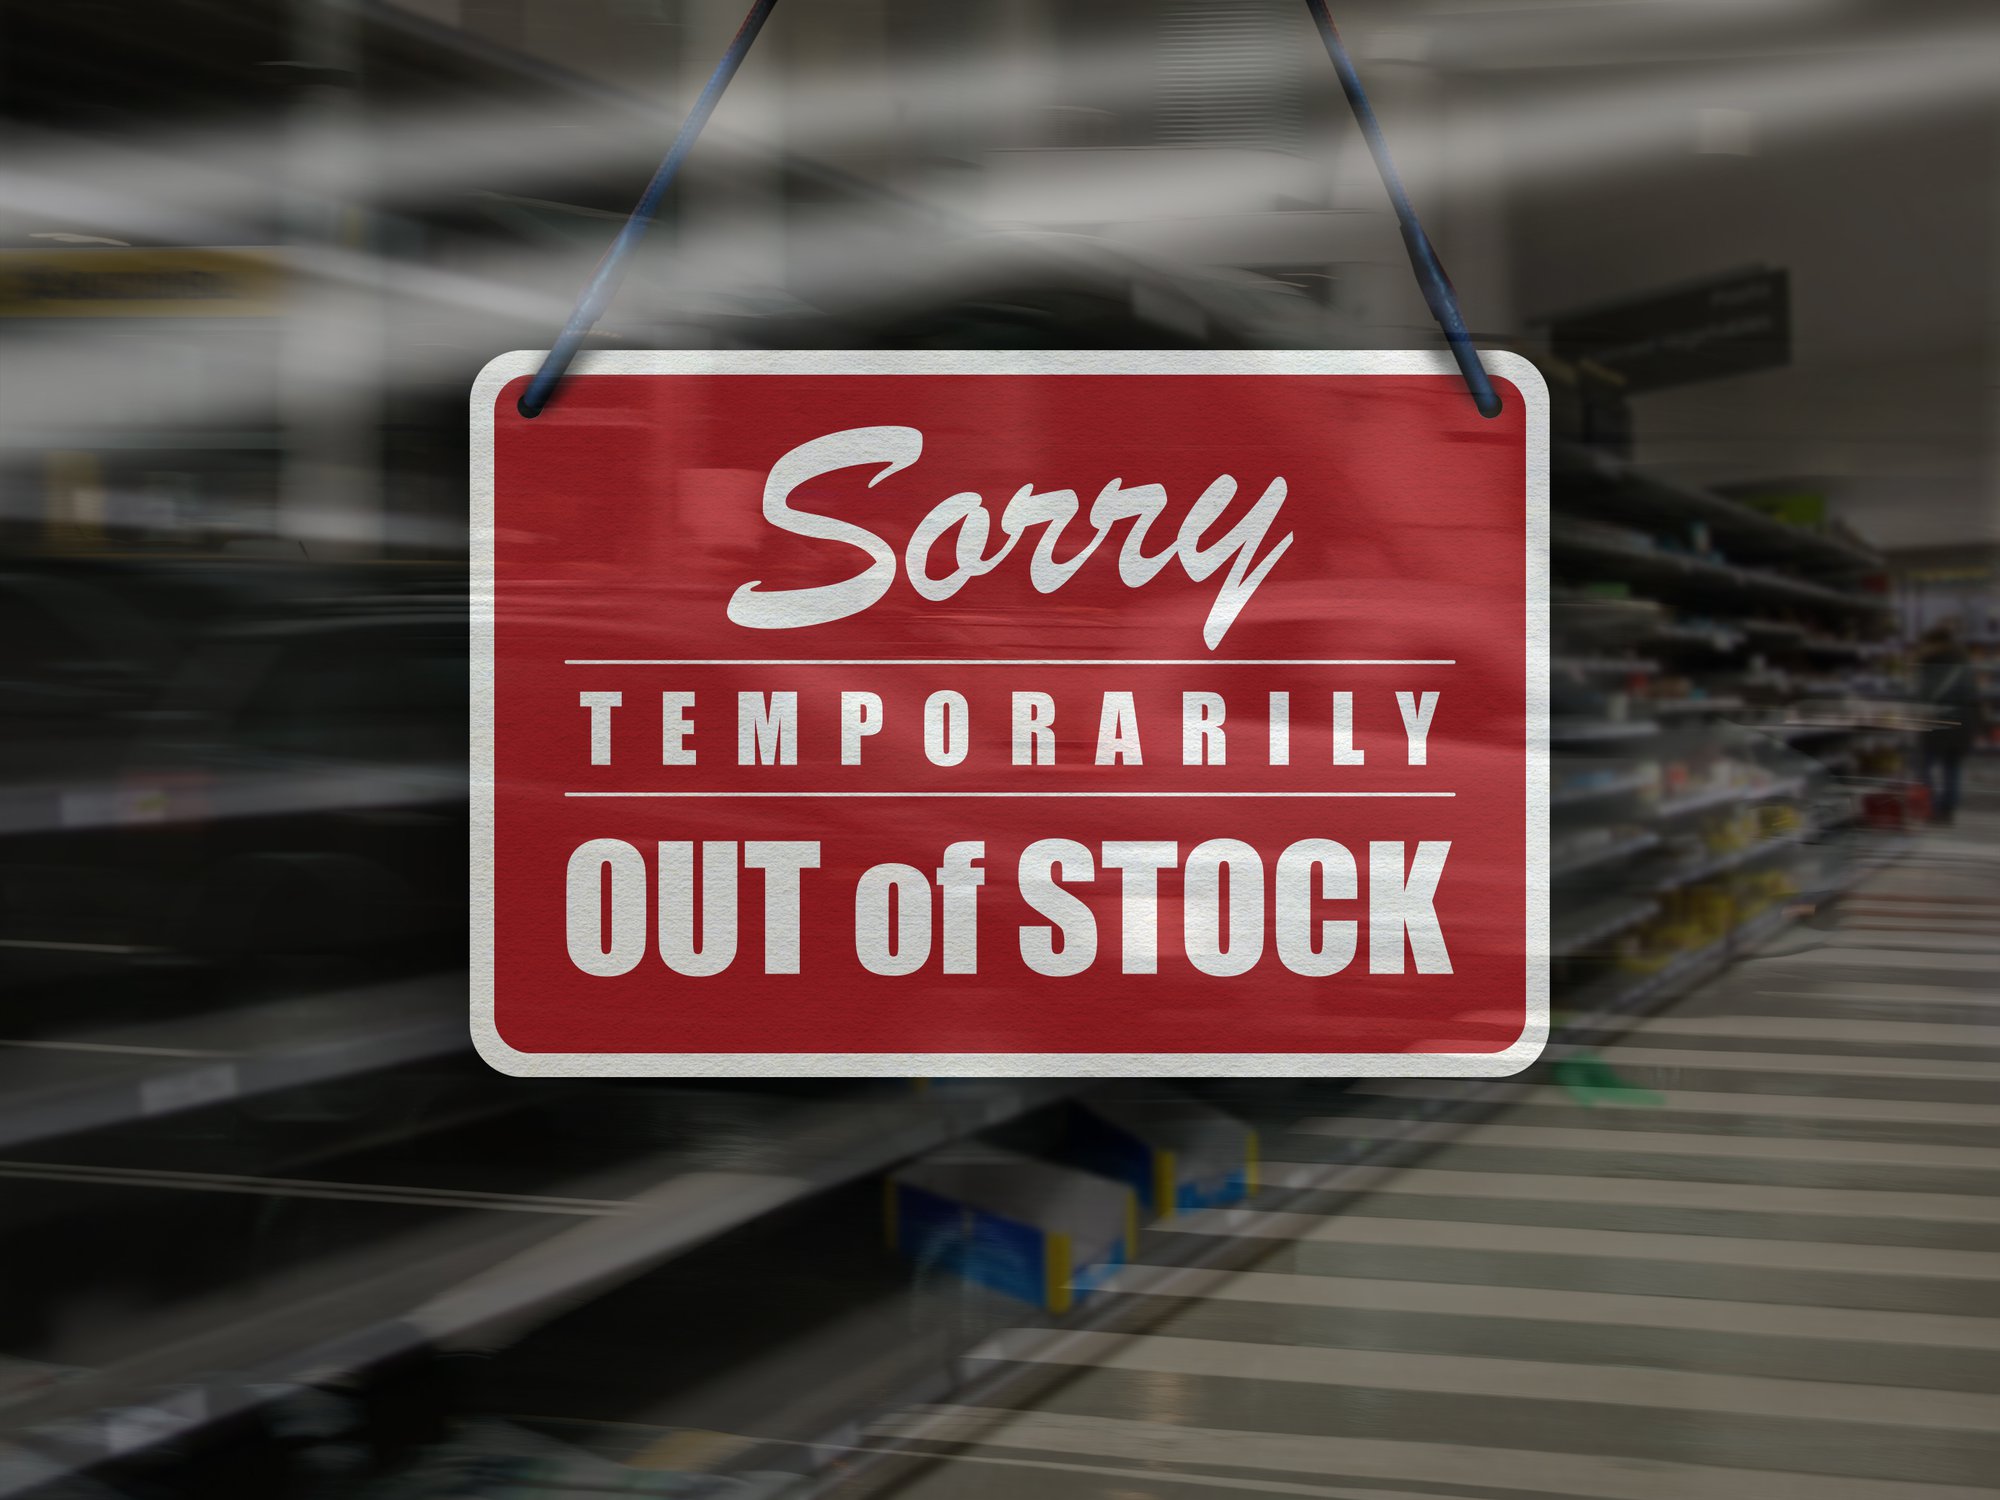 Out of Stock? Now Your Margins Are Out of Luck